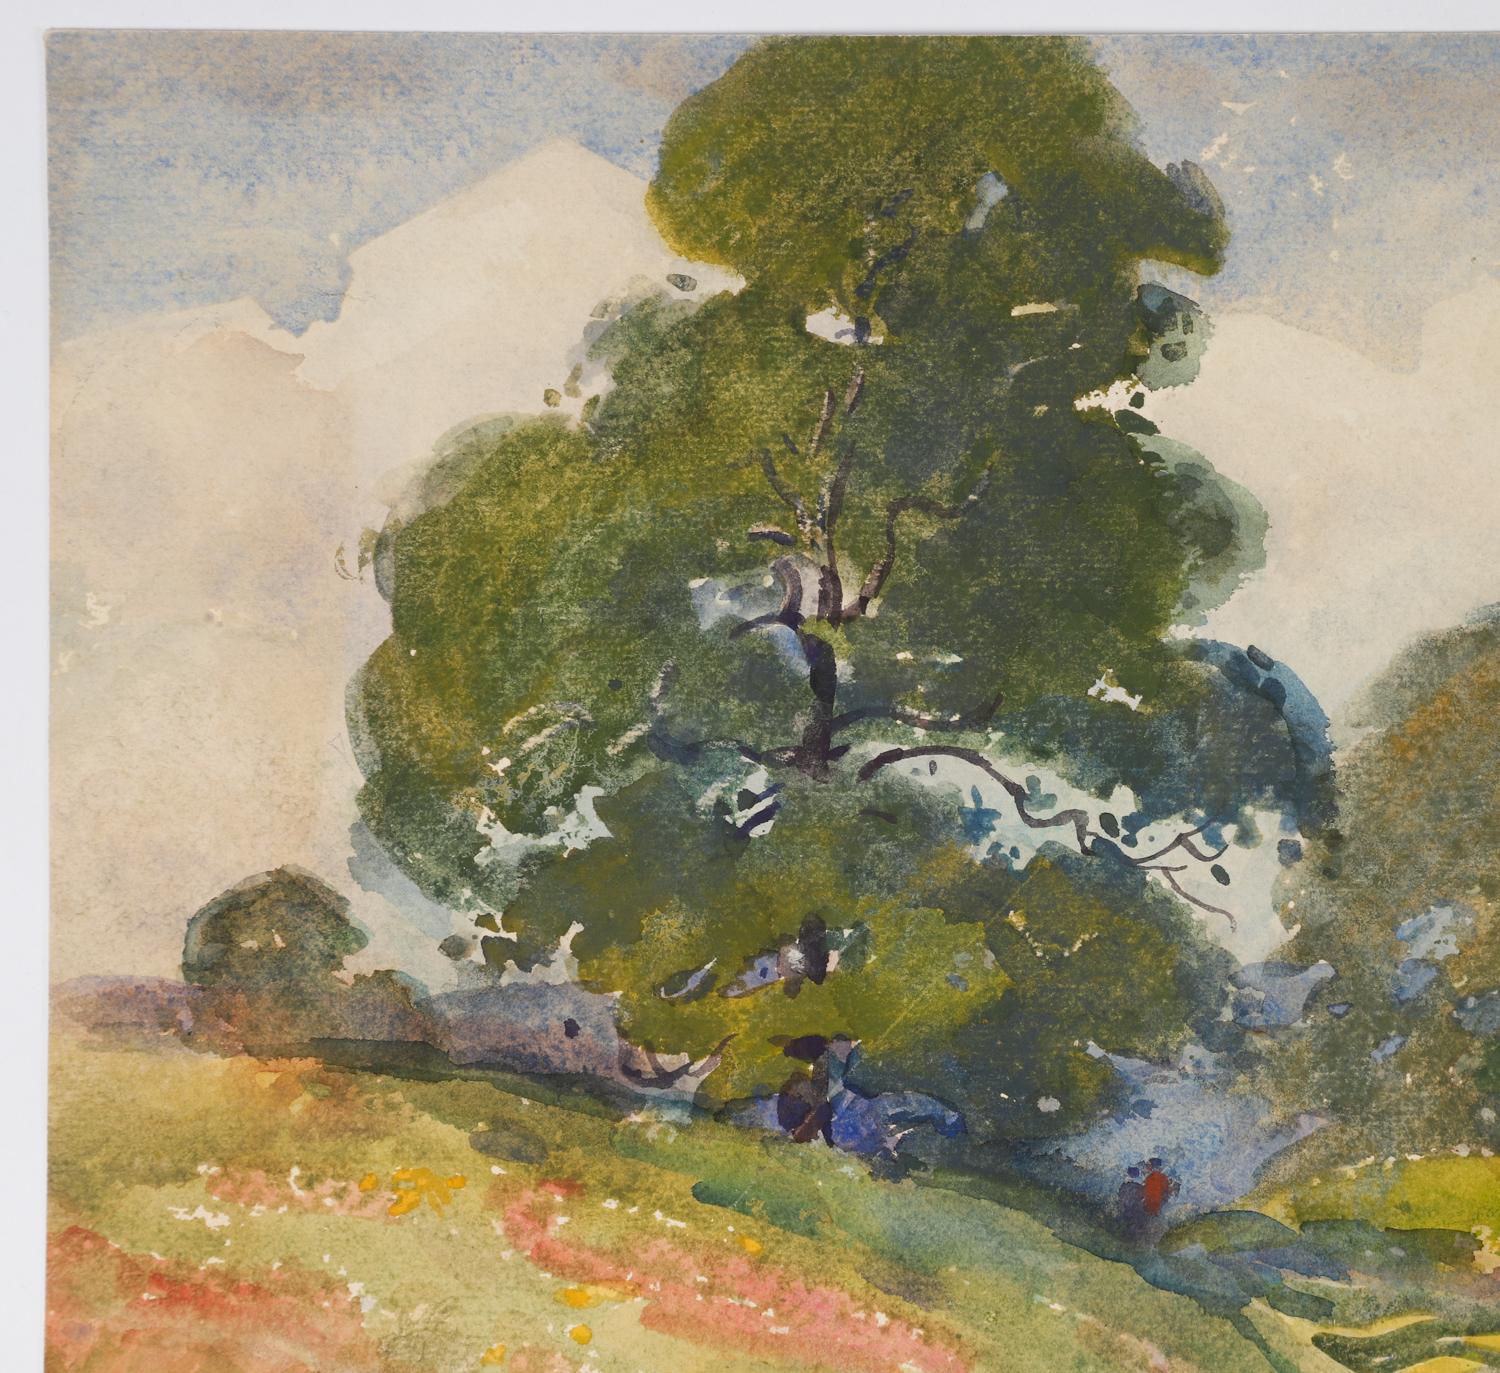 1934 New England Landscape Watercolor Painting by Egbert Cadmus In Good Condition For Sale In Seguin, TX